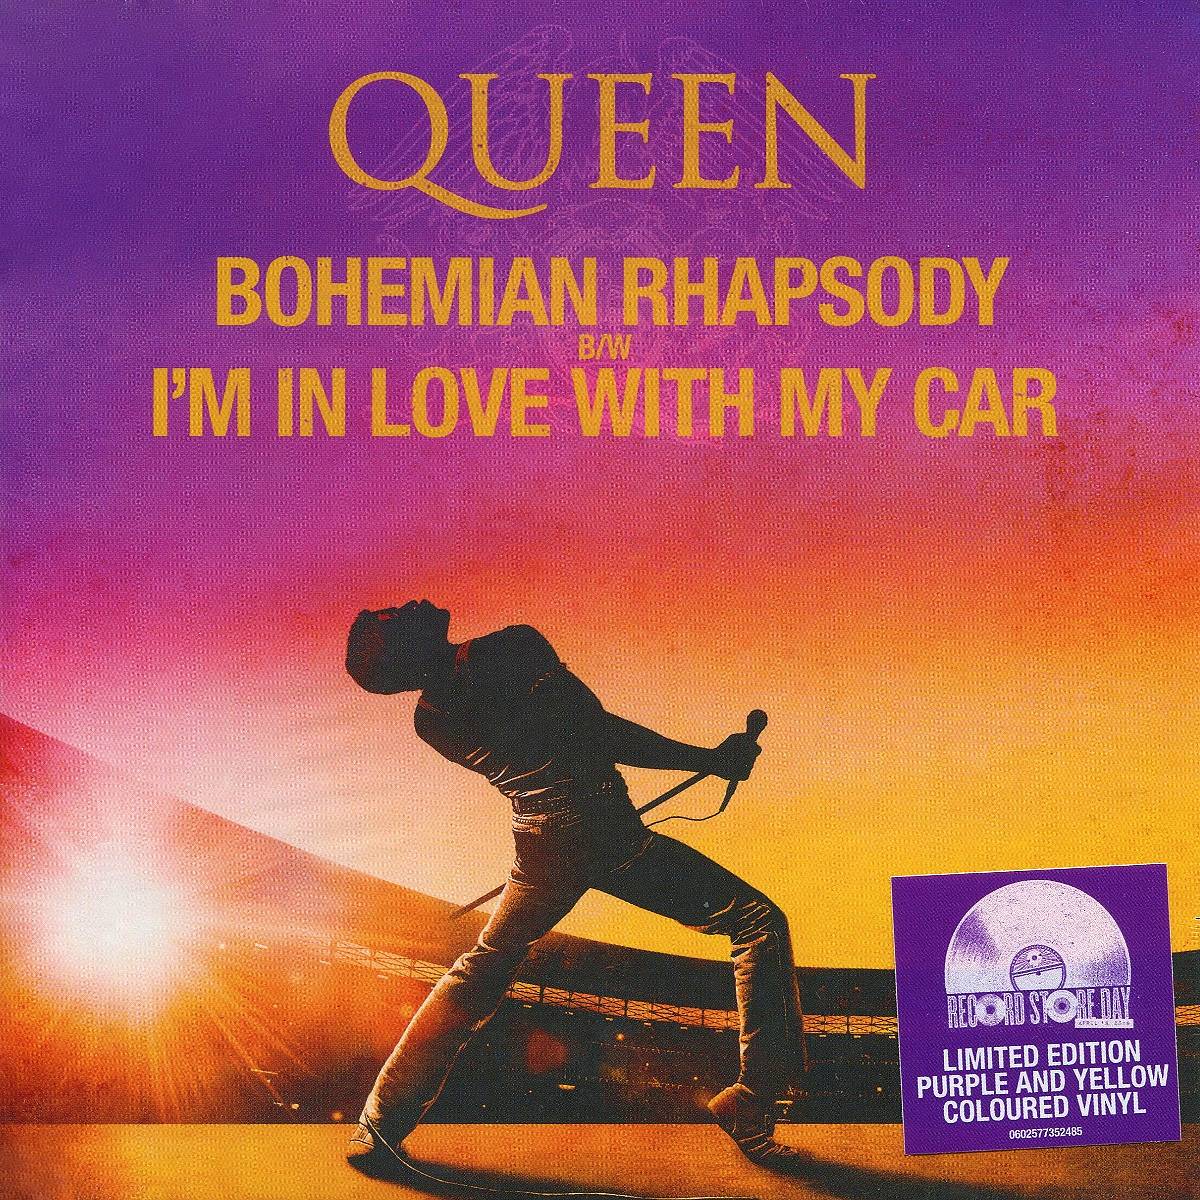 "Bohemian Rhapsody I'm In Love With My Car", vinyle 1978 (groupe Queen)